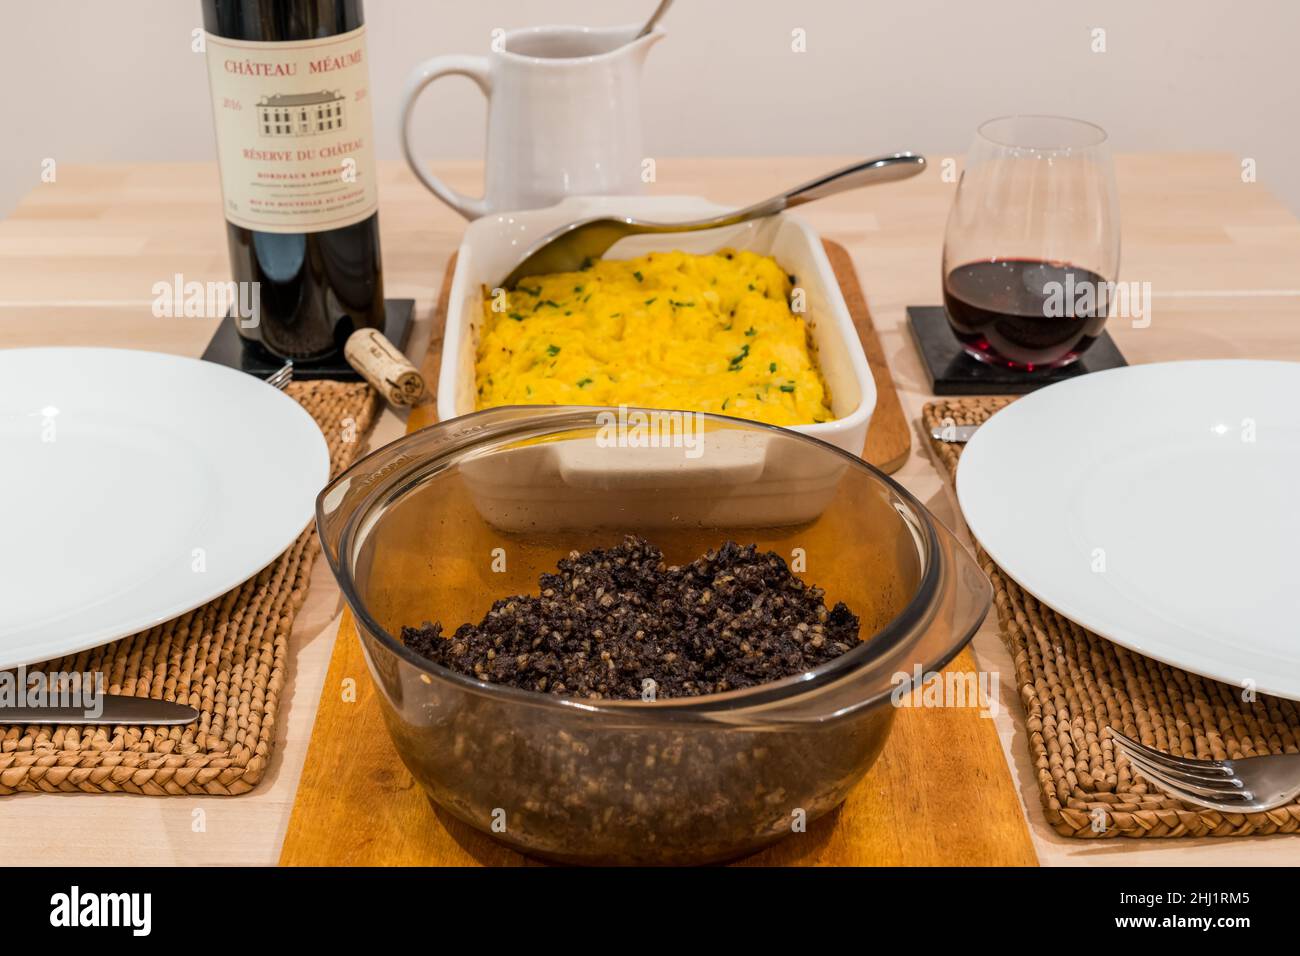 Traditional Scottish Burns Night supper meal: haggis & clapshot (mashed potato & turnip or swede) & bottle of Bordeaux claret Chateau Meaume red wine Stock Photo